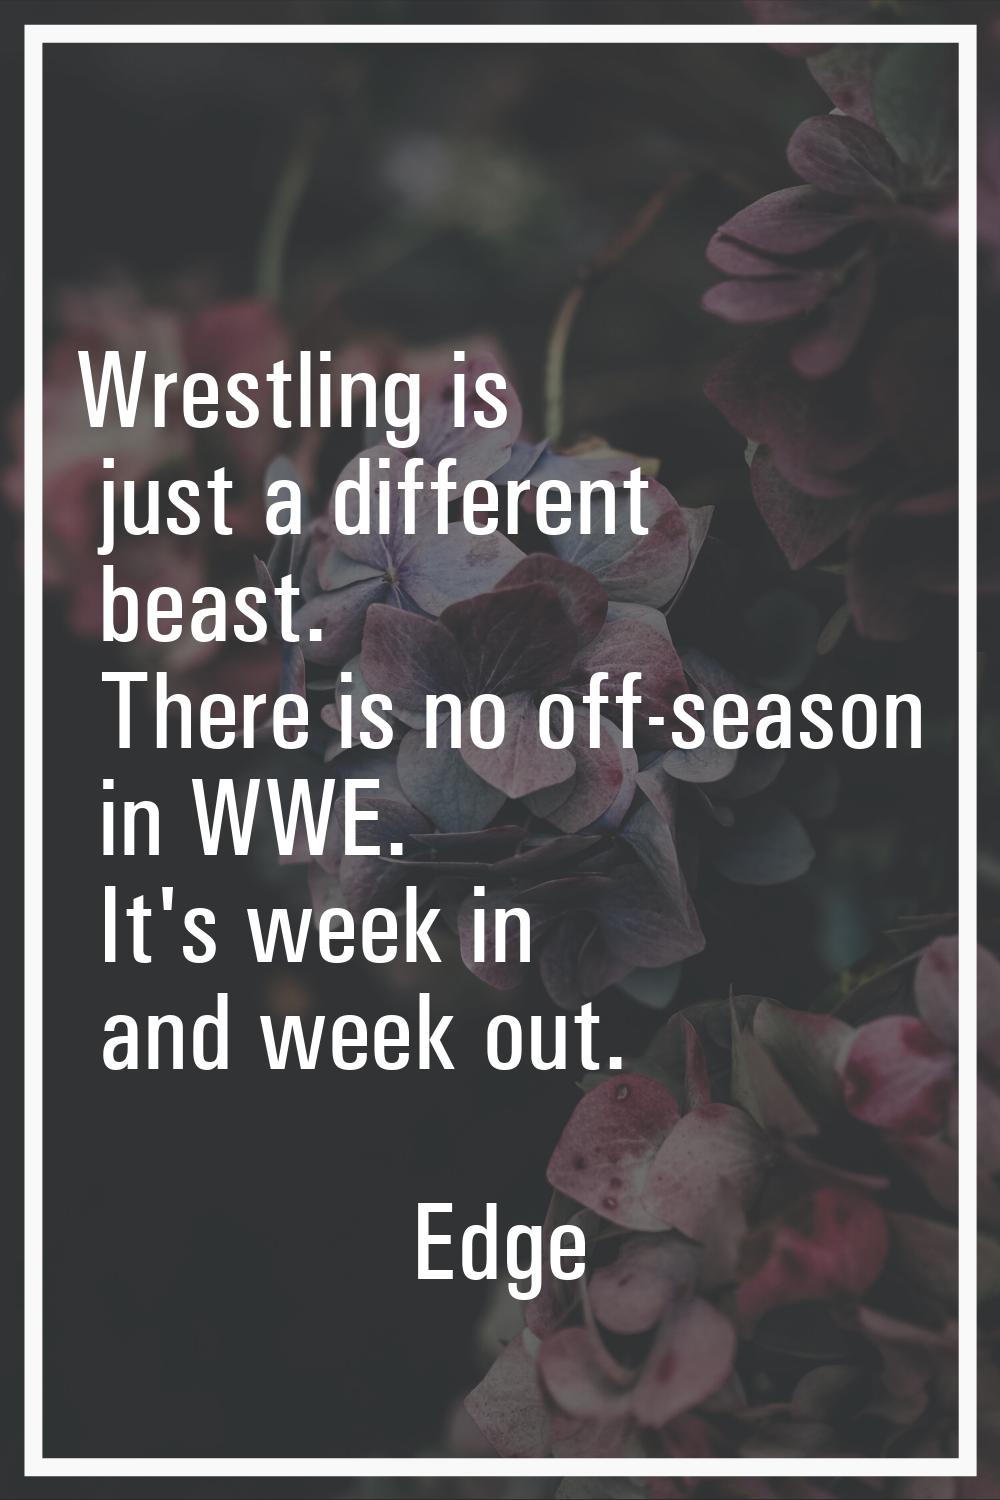 Wrestling is just a different beast. There is no off-season in WWE. It's week in and week out.